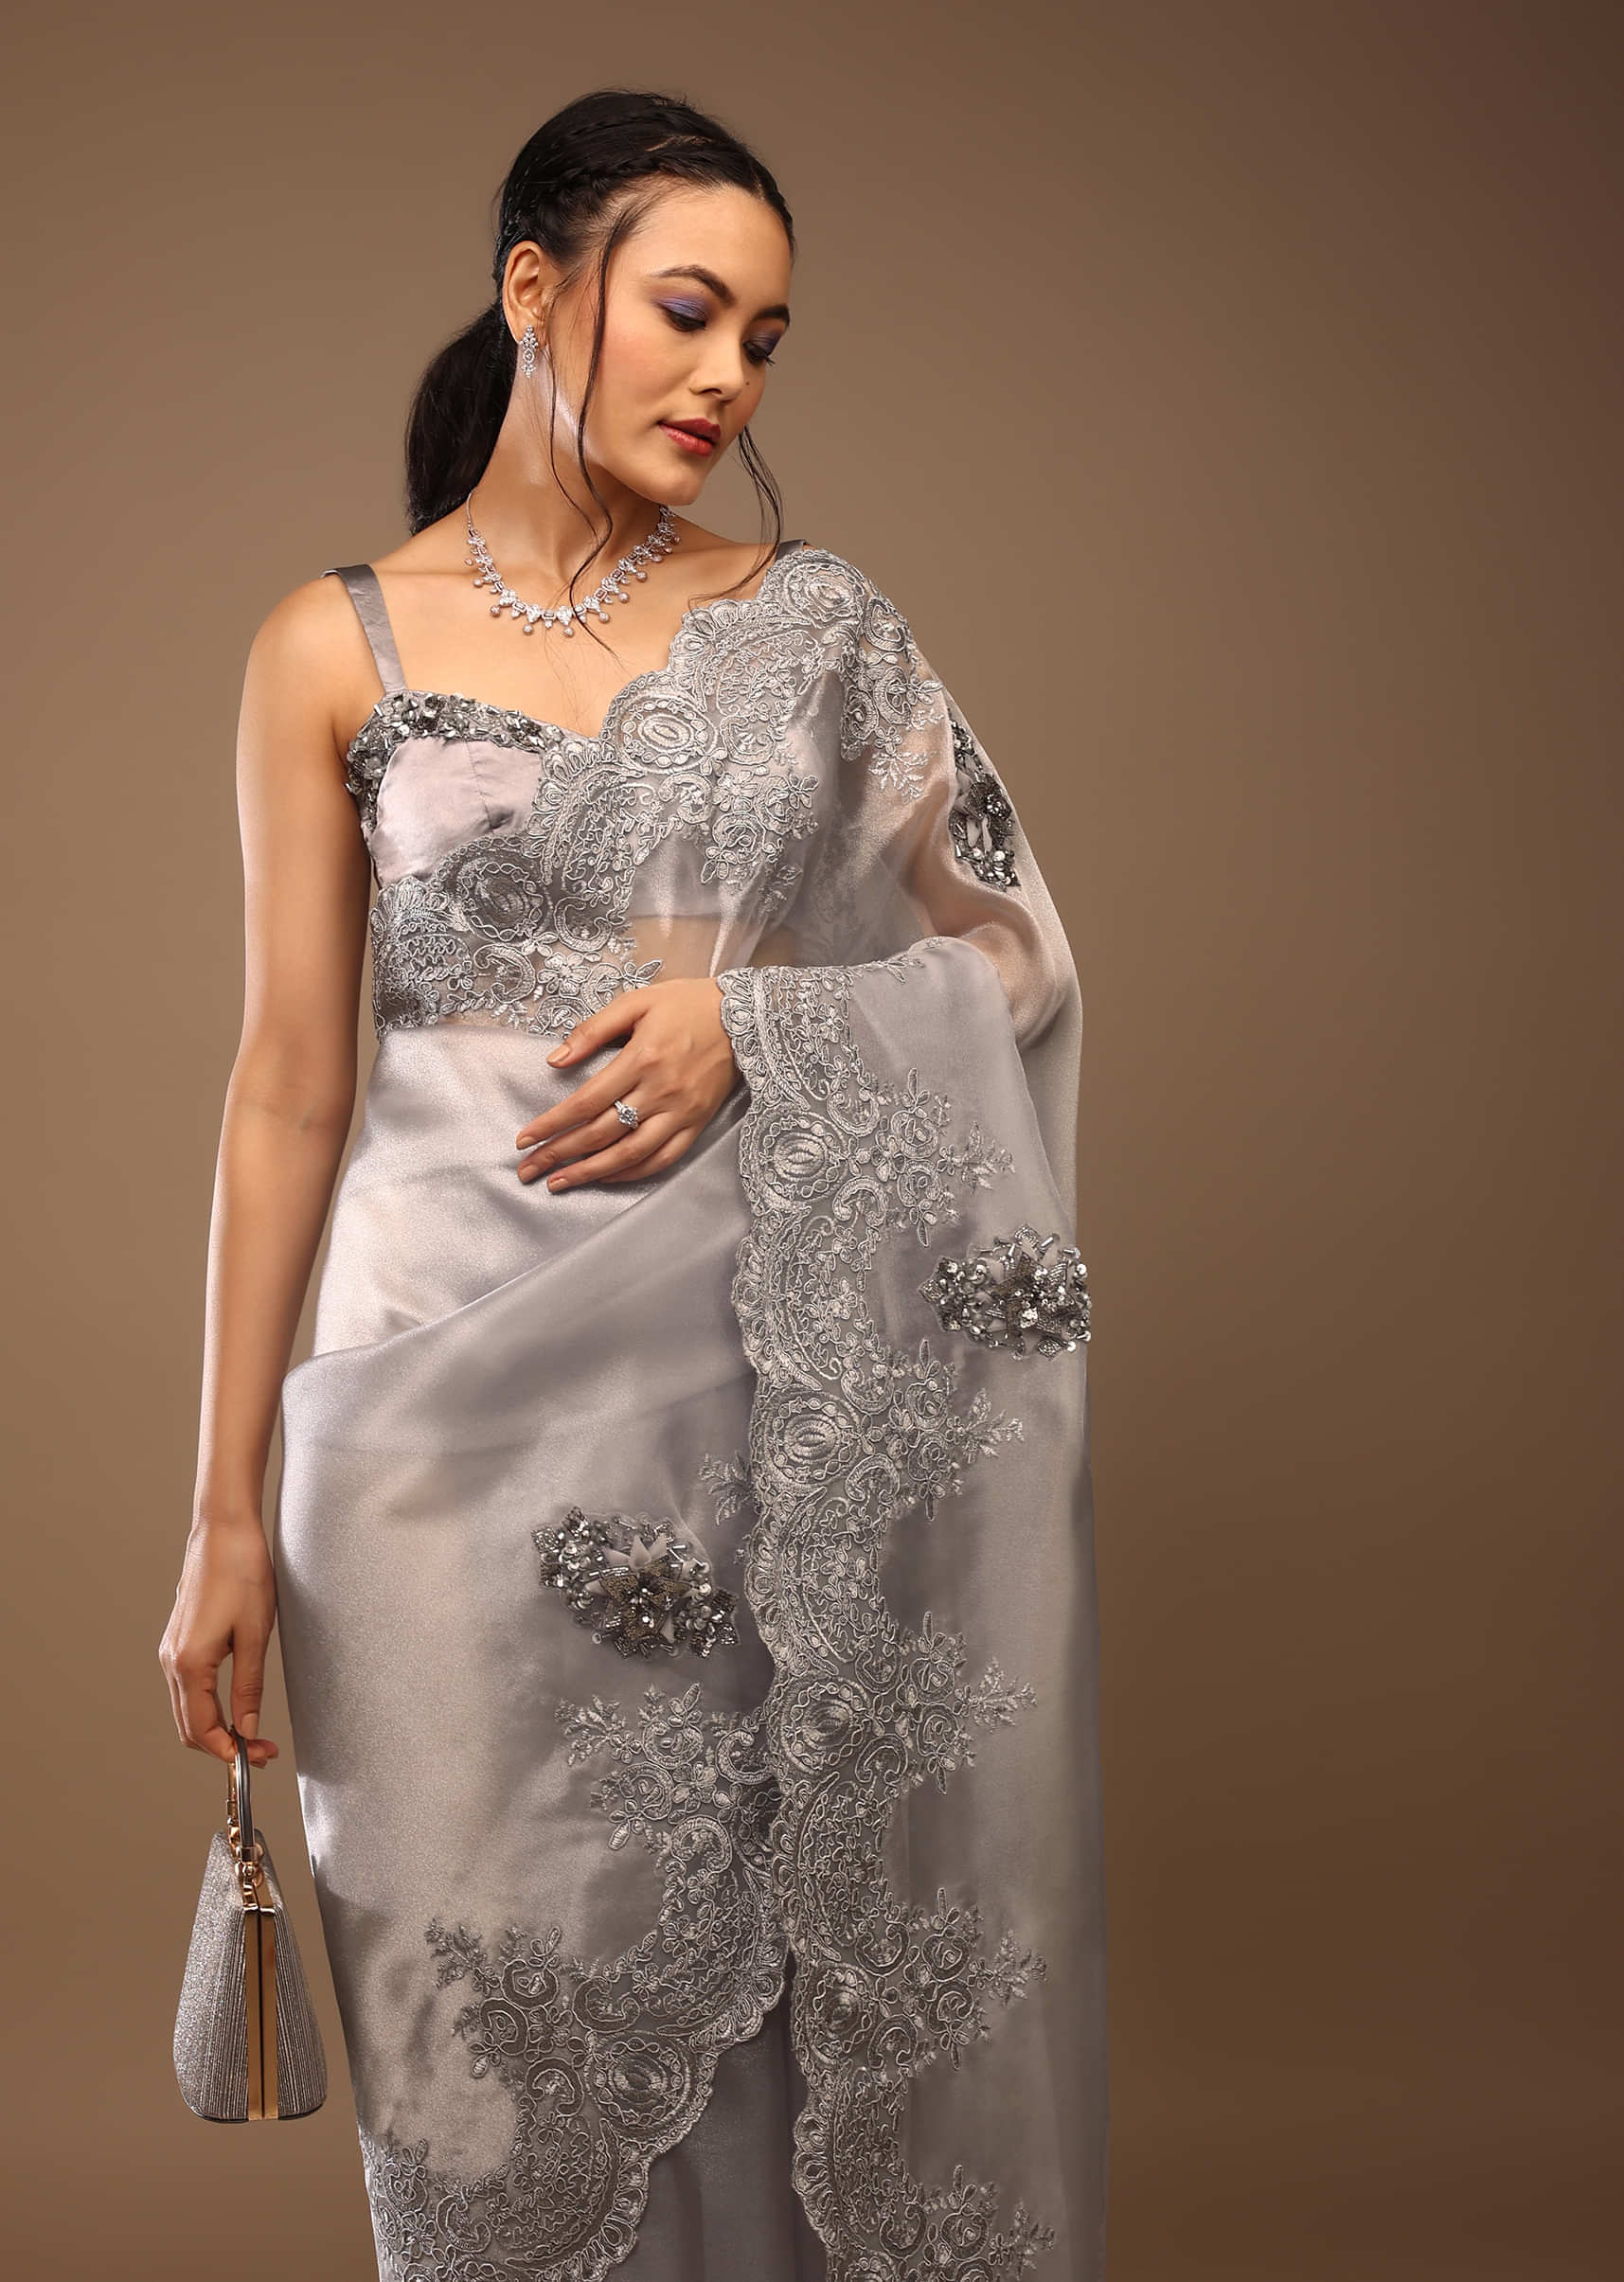 Gull Grey Saree With A Crop Top In Sequins Embroidery, Crafted In Tissue Organza With The Sequins, Cut Dana, Floral Designed Motifs, And Laces